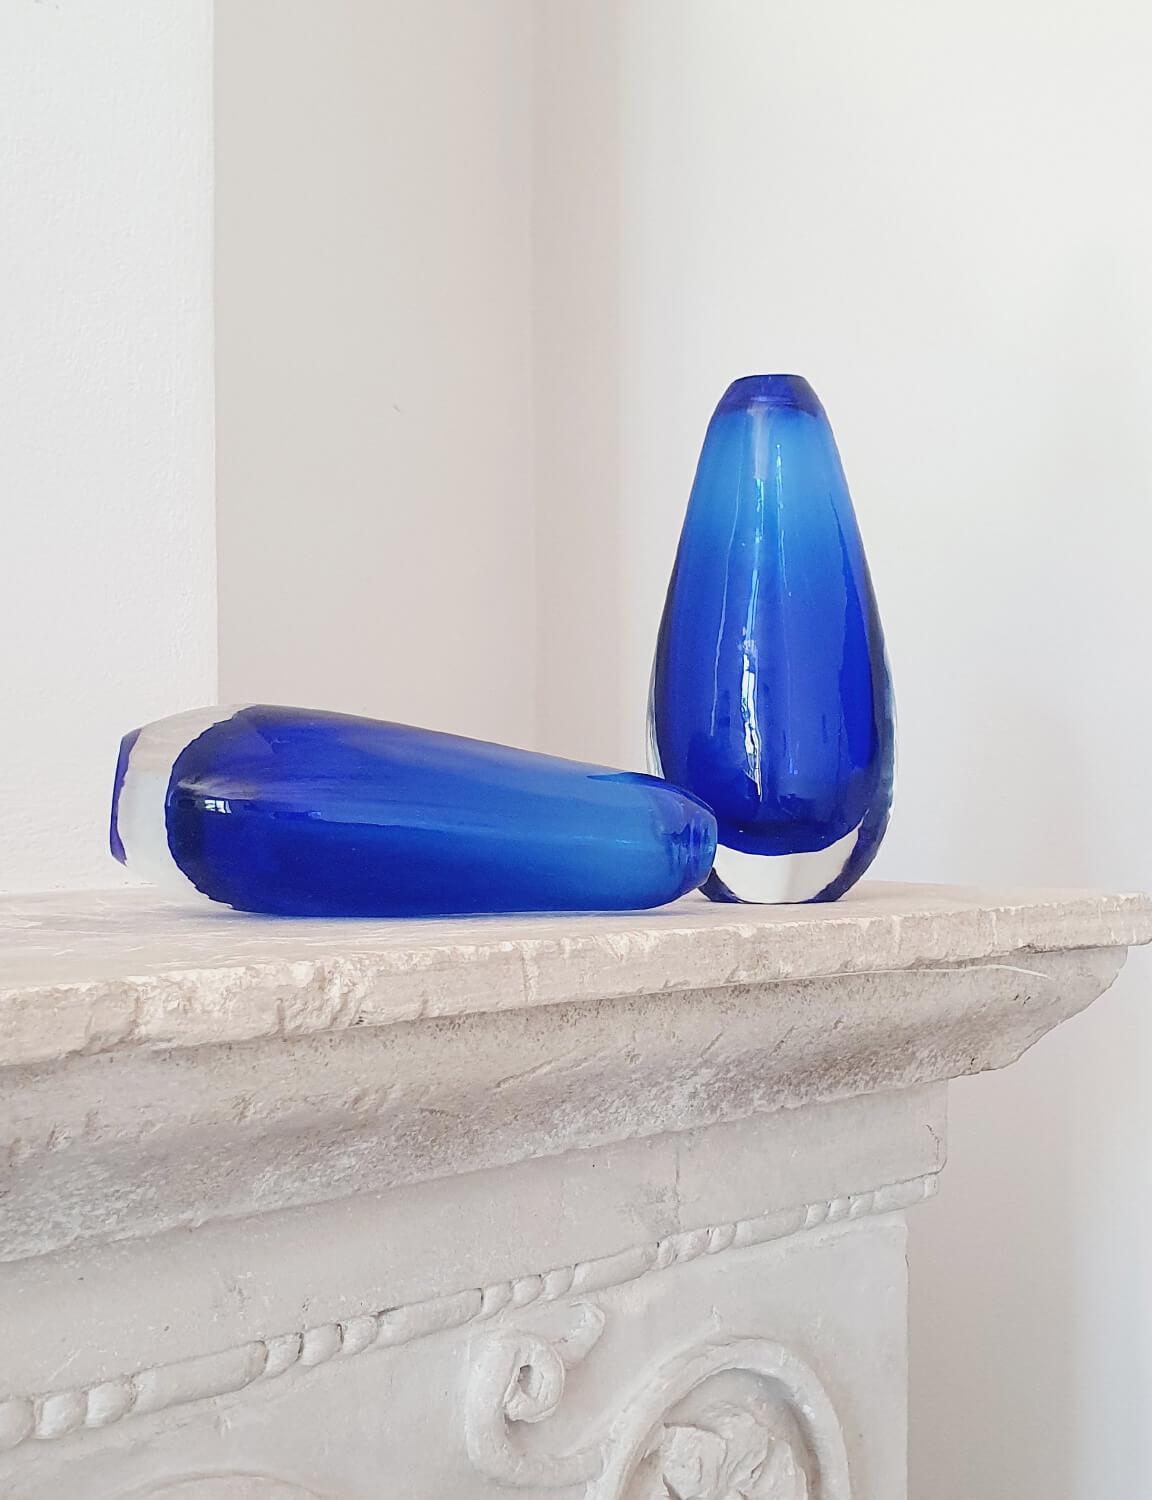 Fabulous pair of hand blown bright cobalt blue early Flavio Poli Vases. Hand blown in the 1960s in Murano - the pair are in very good condition.